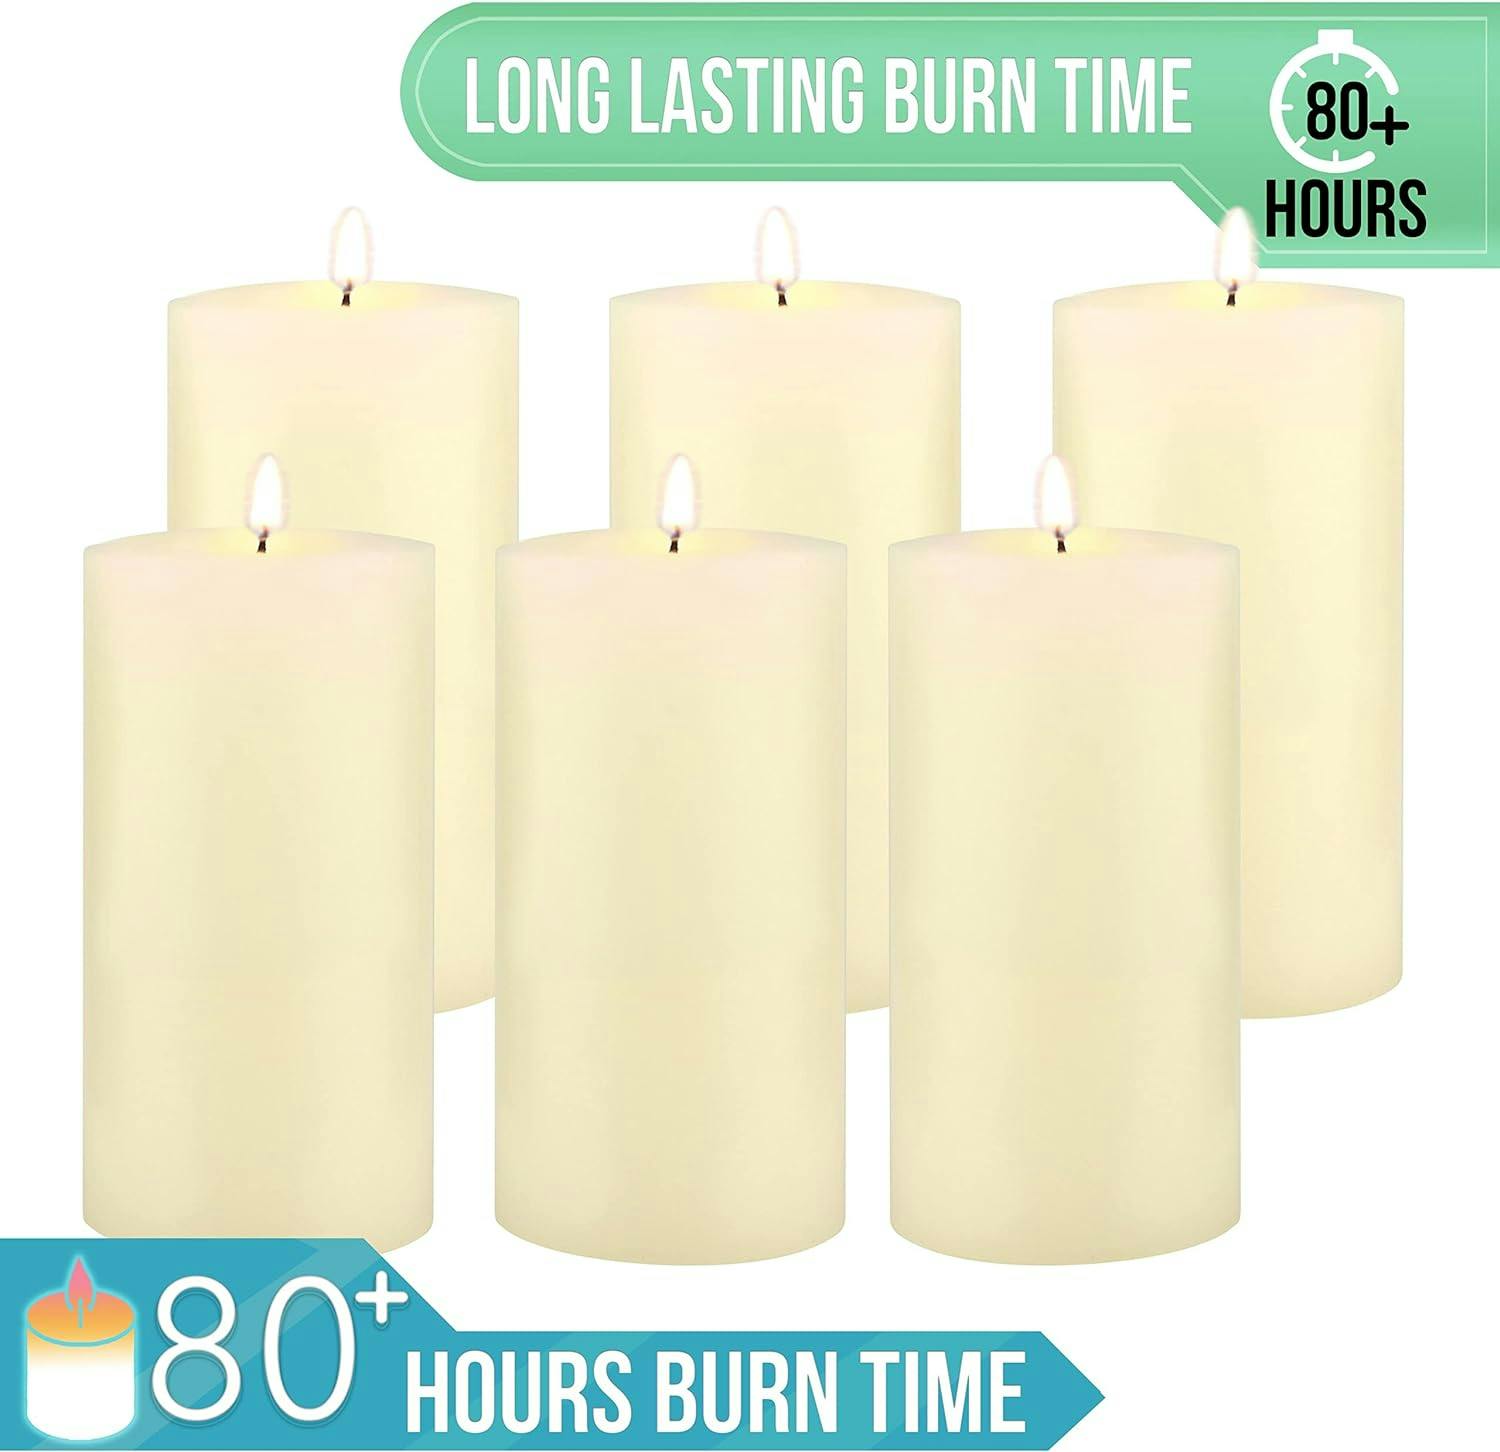 Ivory Smooth 3x6 Inch Pillar Candles, 6-Pack for Elegant Ambiance